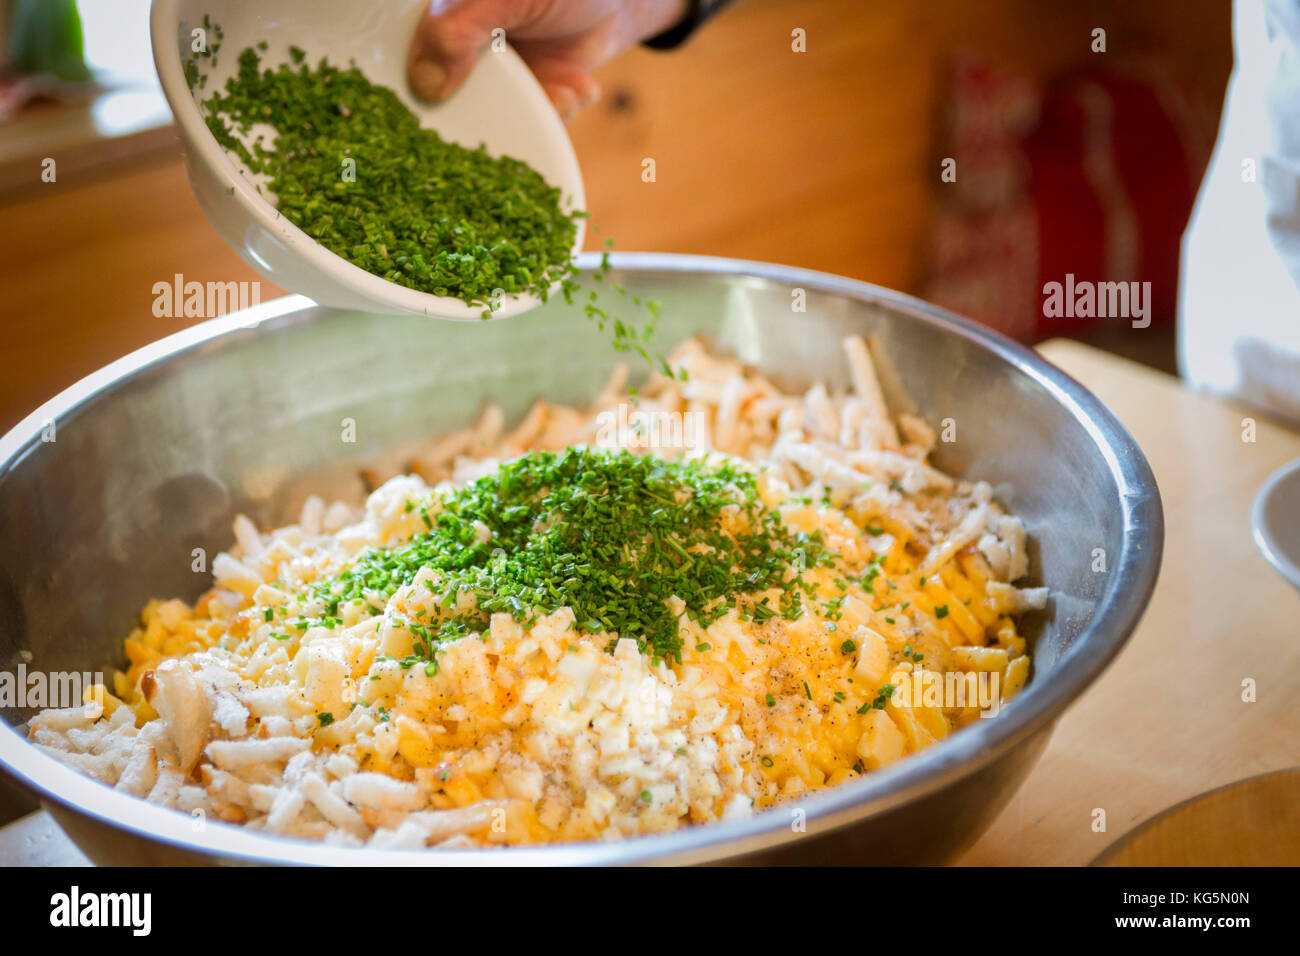 a Chef is preparing a traditional local food with eggs, brot, and chives, Bolzano province, South Tyrol, Italy Stock Photo